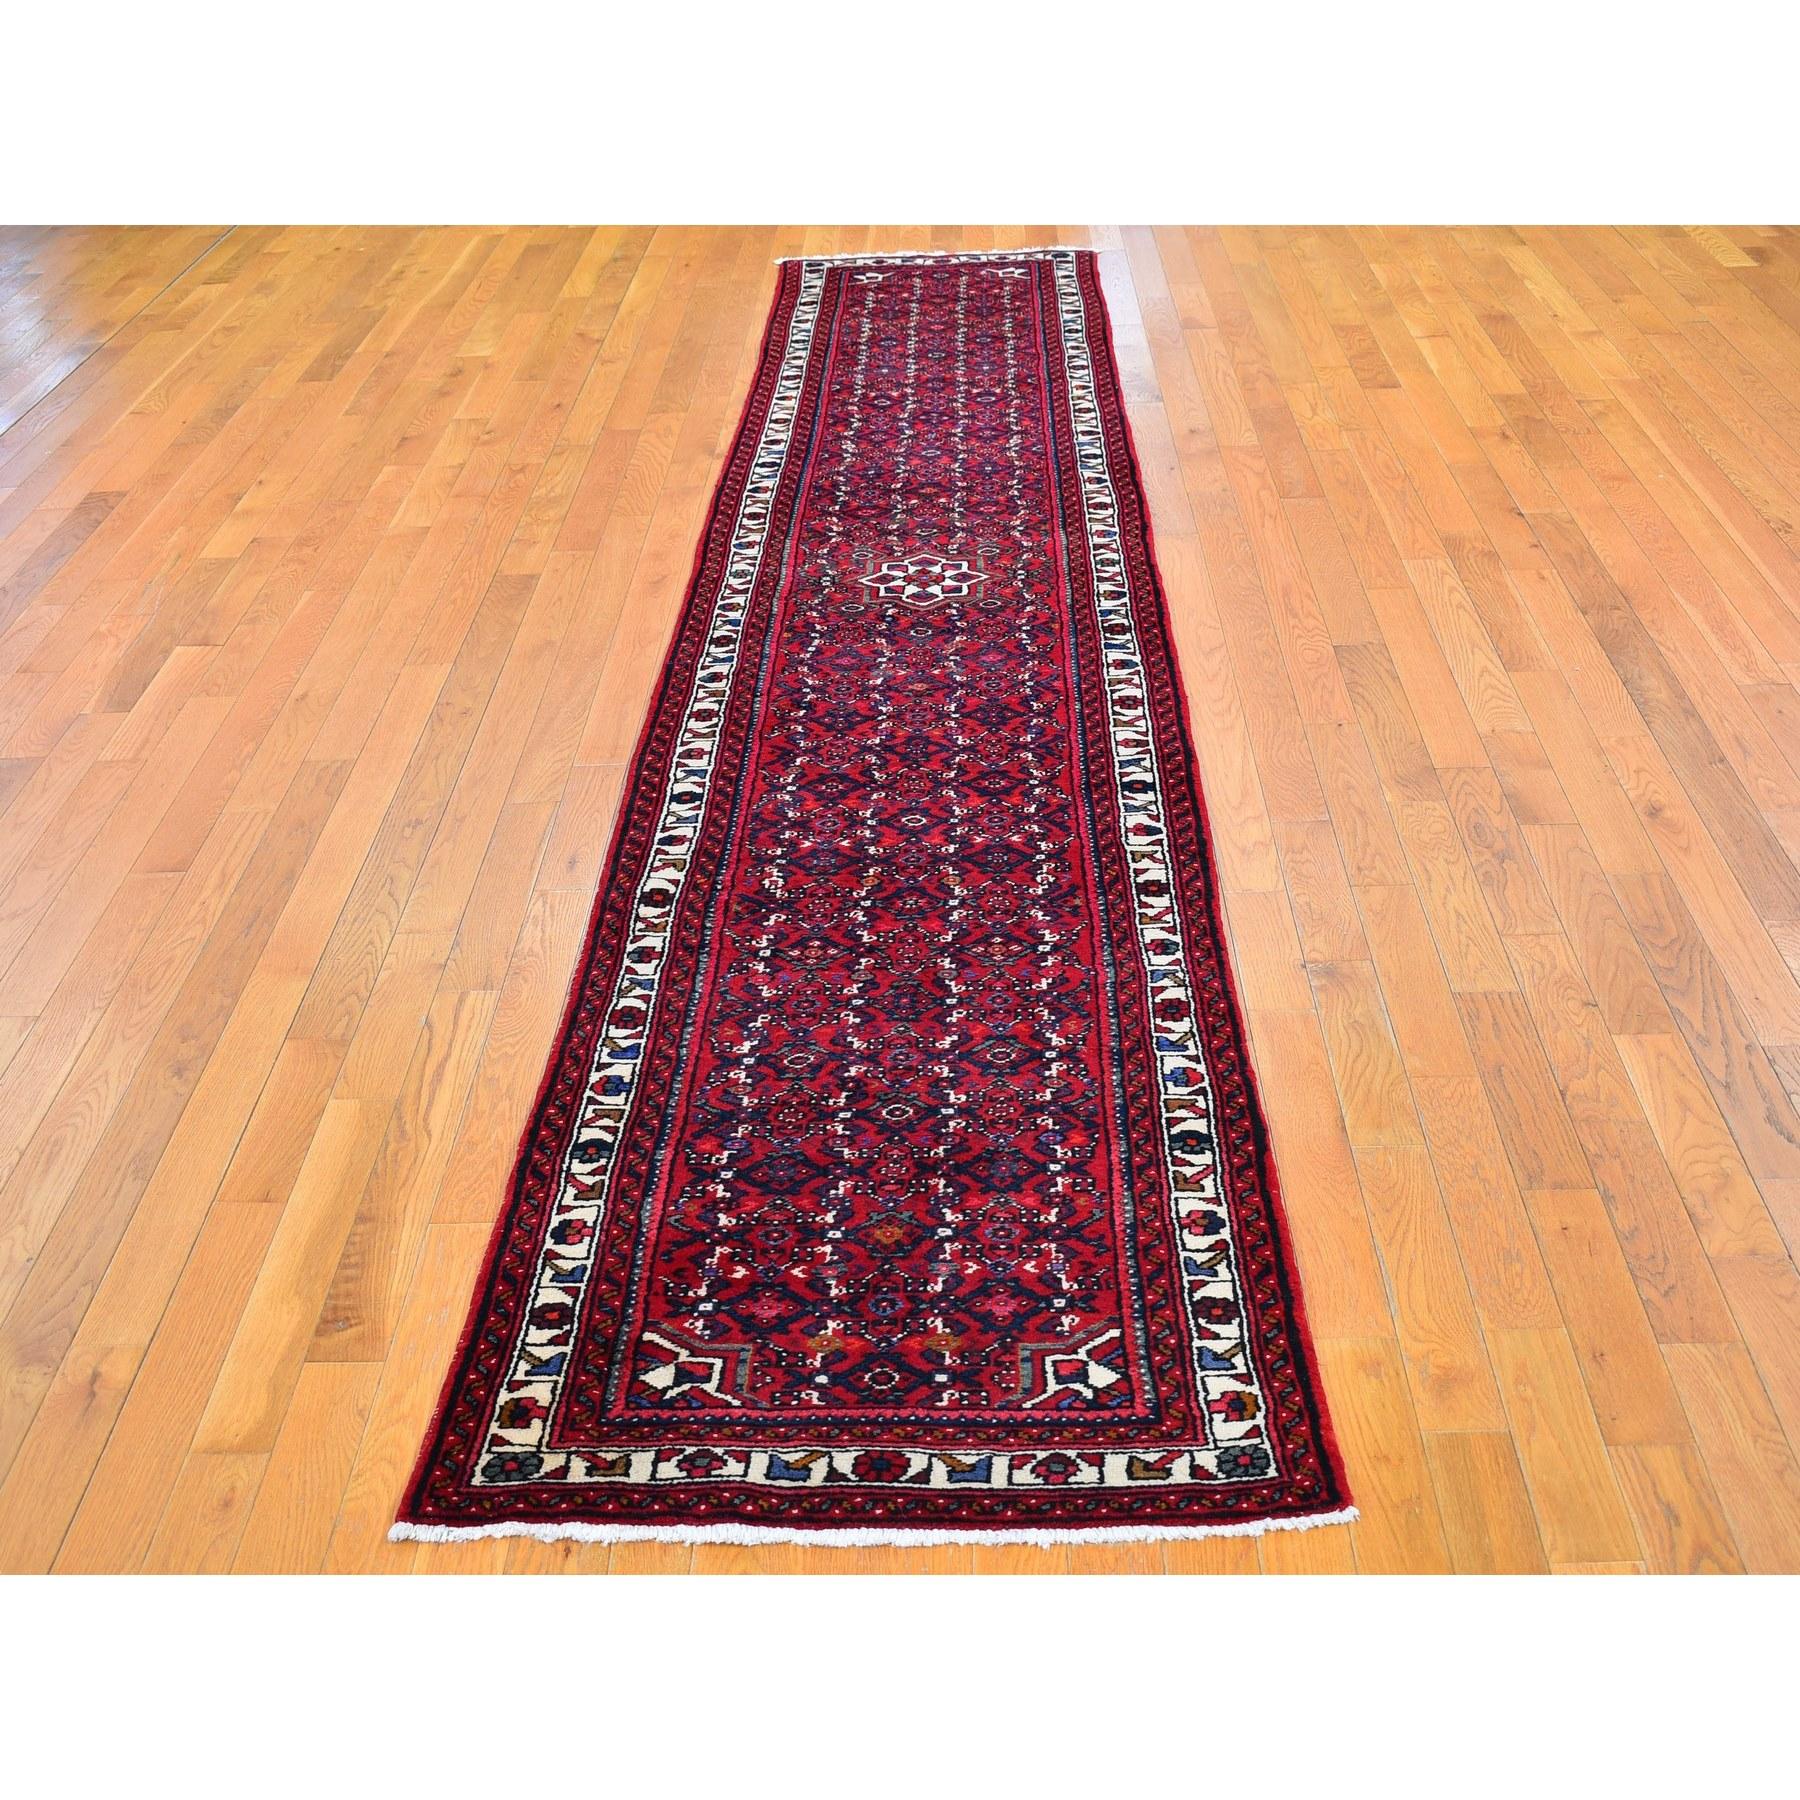 This fabulous hand-knotted carpet has been created and designed for extra strength and durability. This rug has been handcrafted for weeks in the traditional method that is used to make
Exact rug size in feet and inches : 2'8